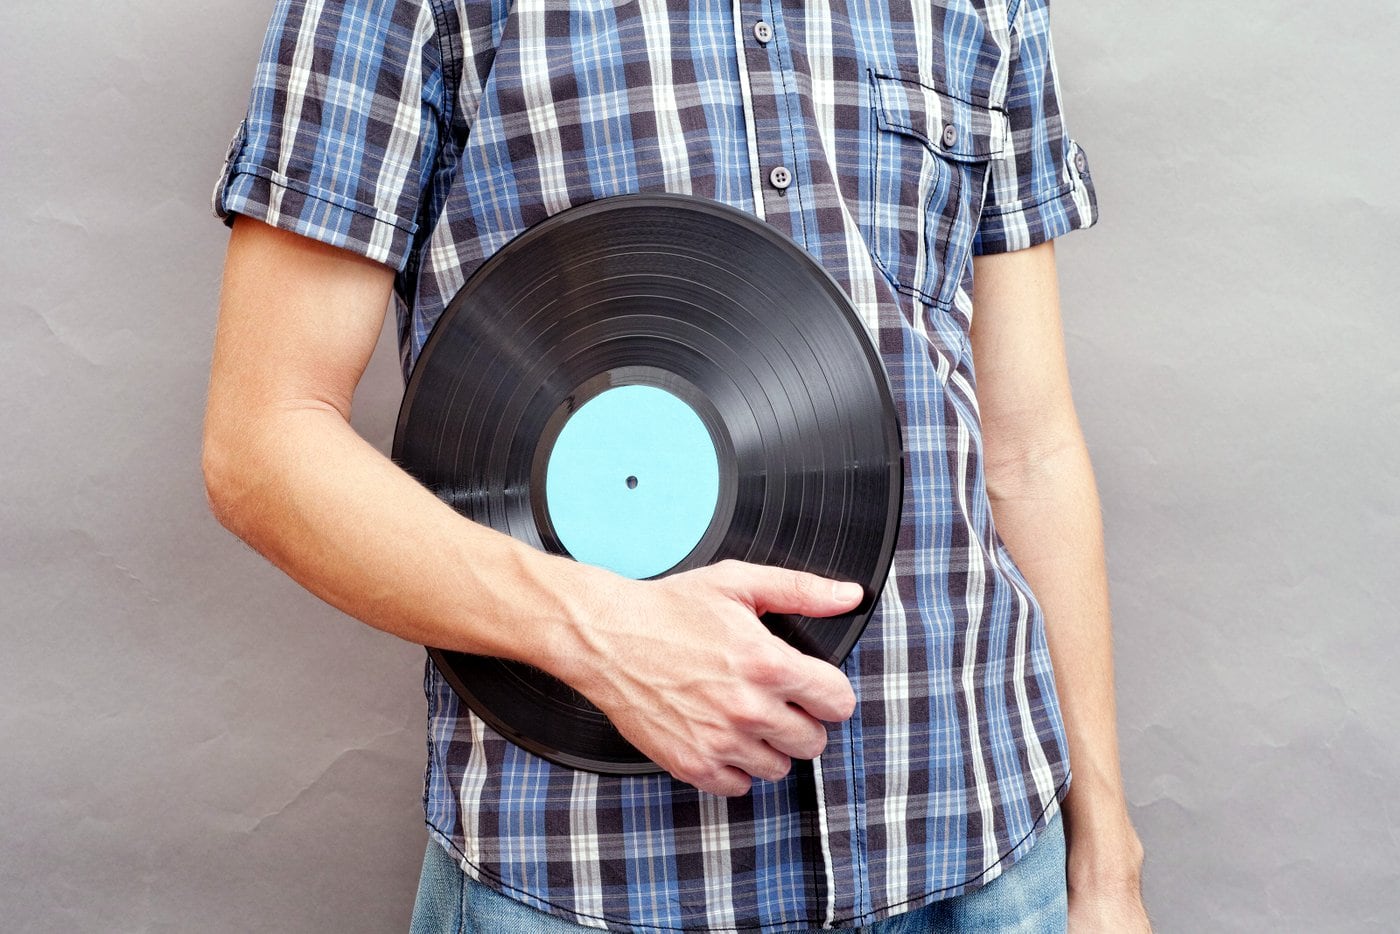 Man casually holding a vinyl record - destroying its integrity foreverrrr